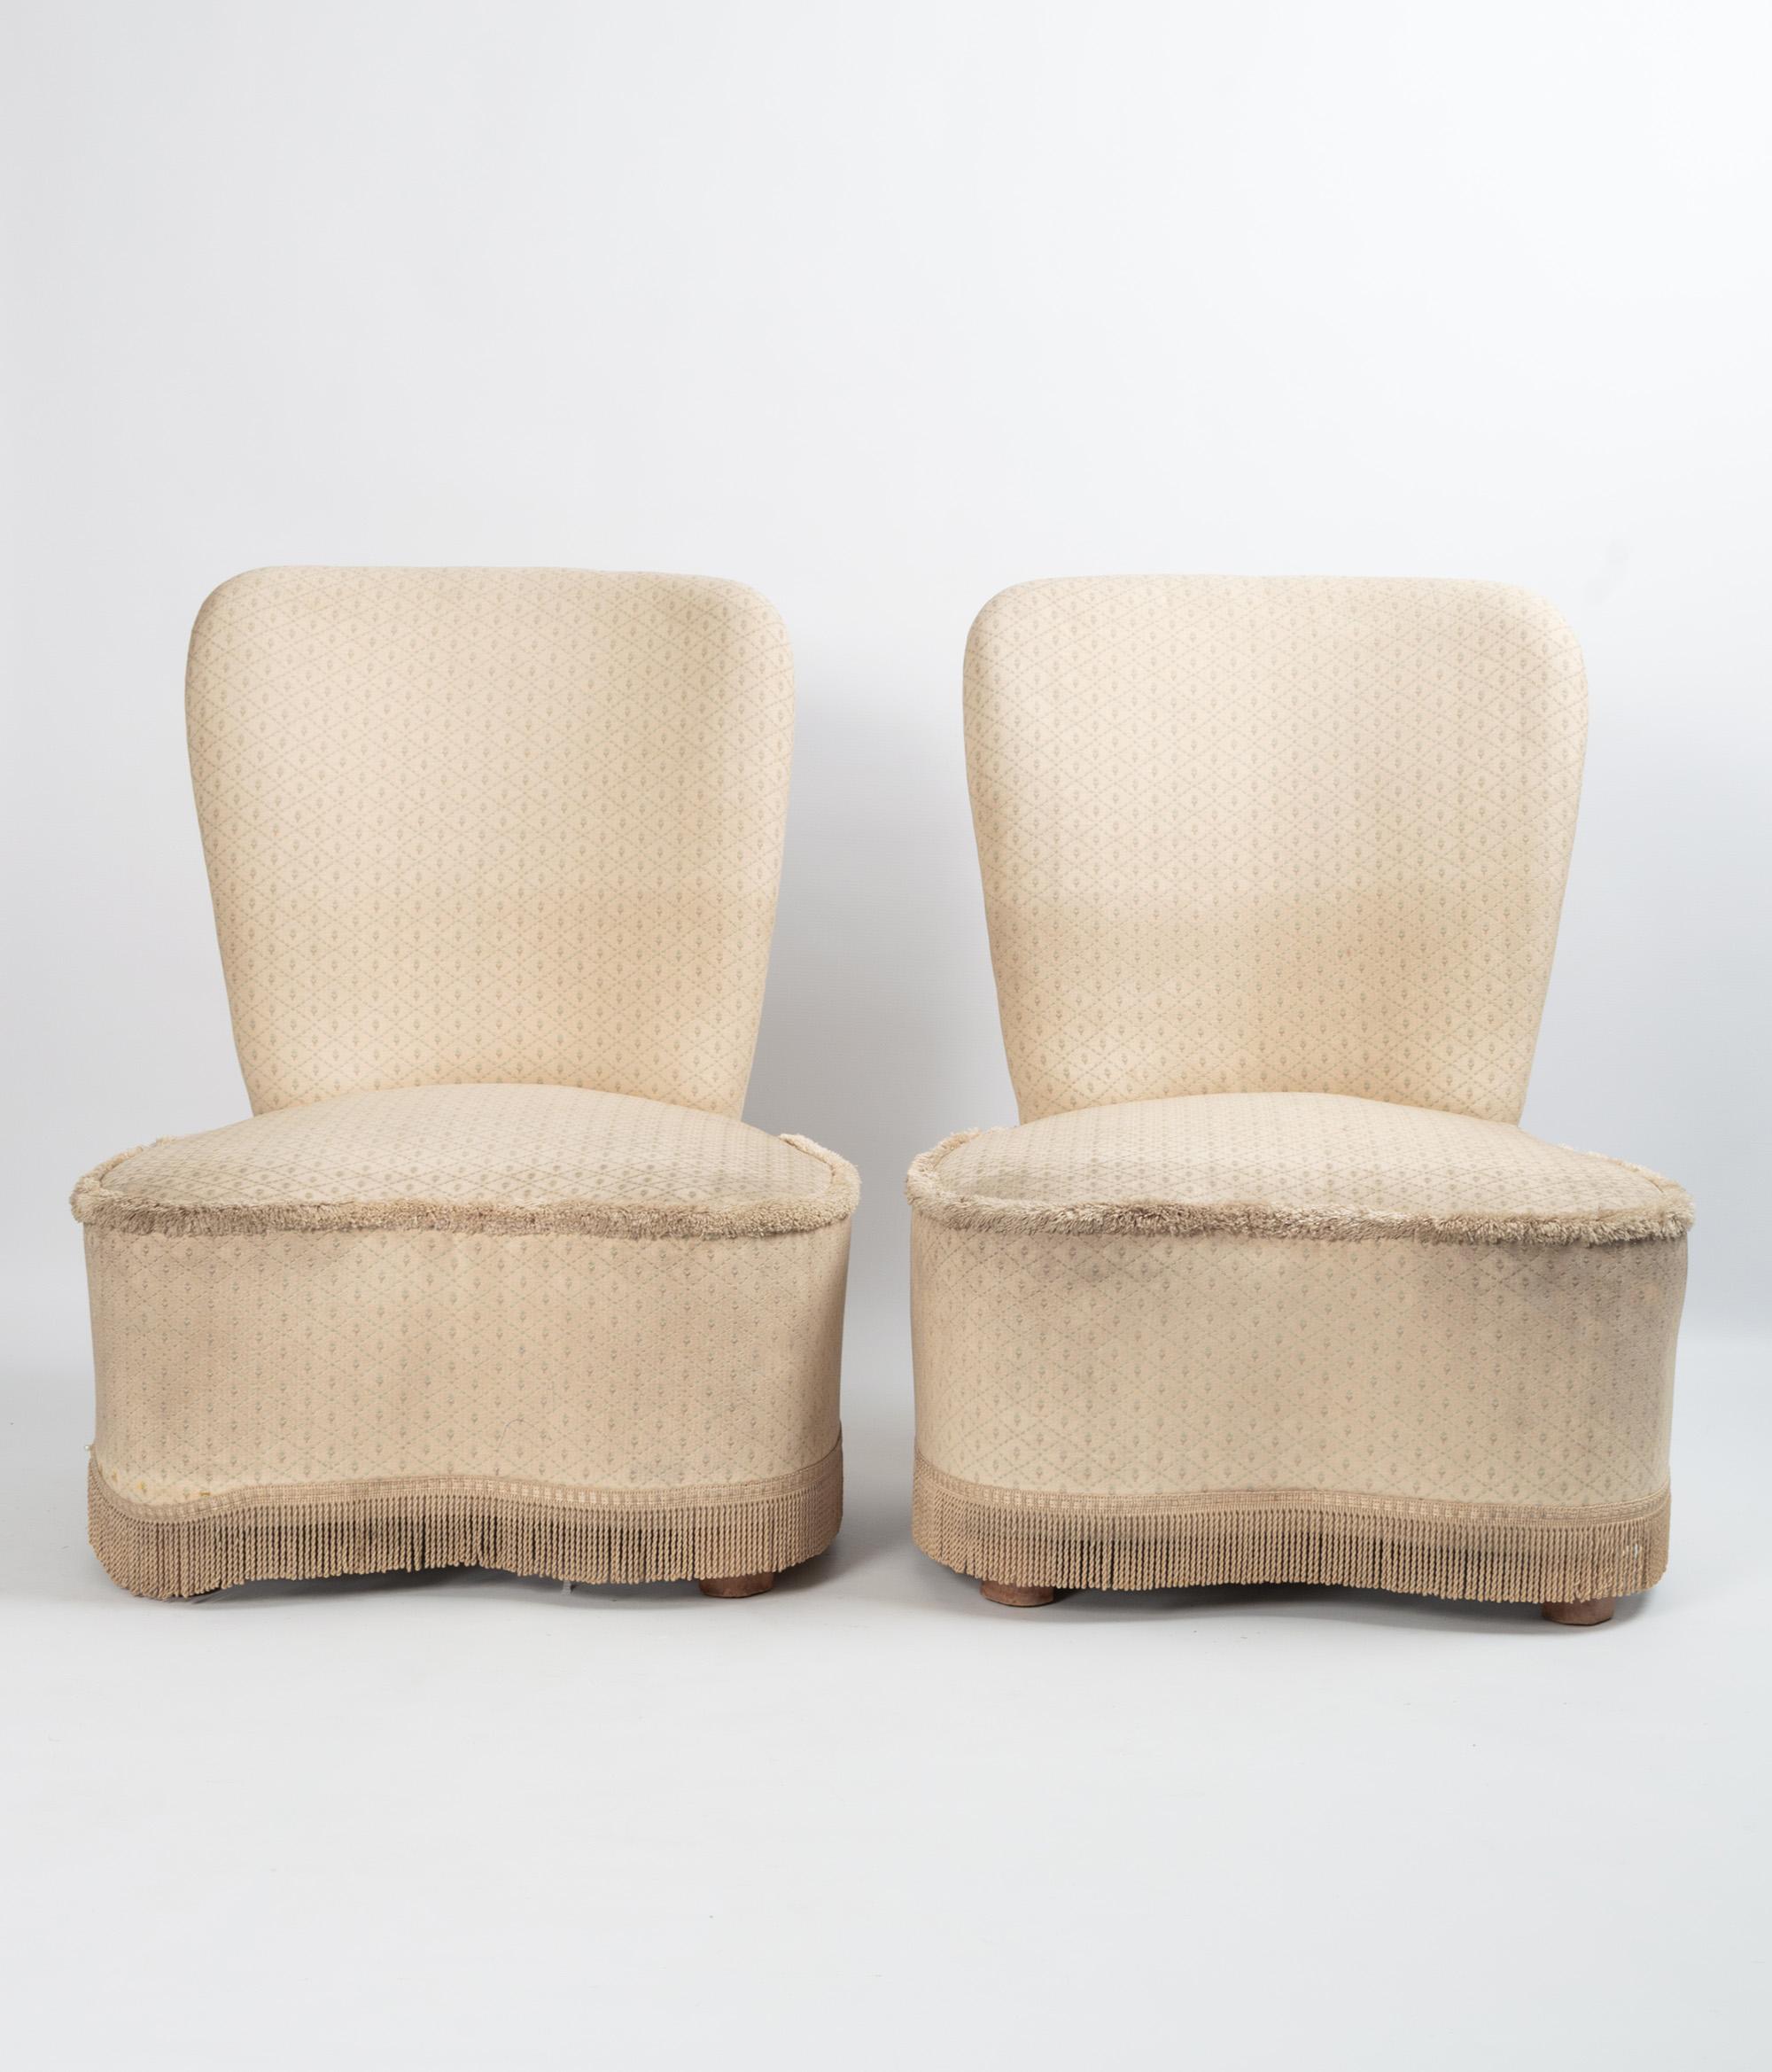 Pair of French Art Deco Upholstered Boudoir Chairs, C.1940 For Sale 4